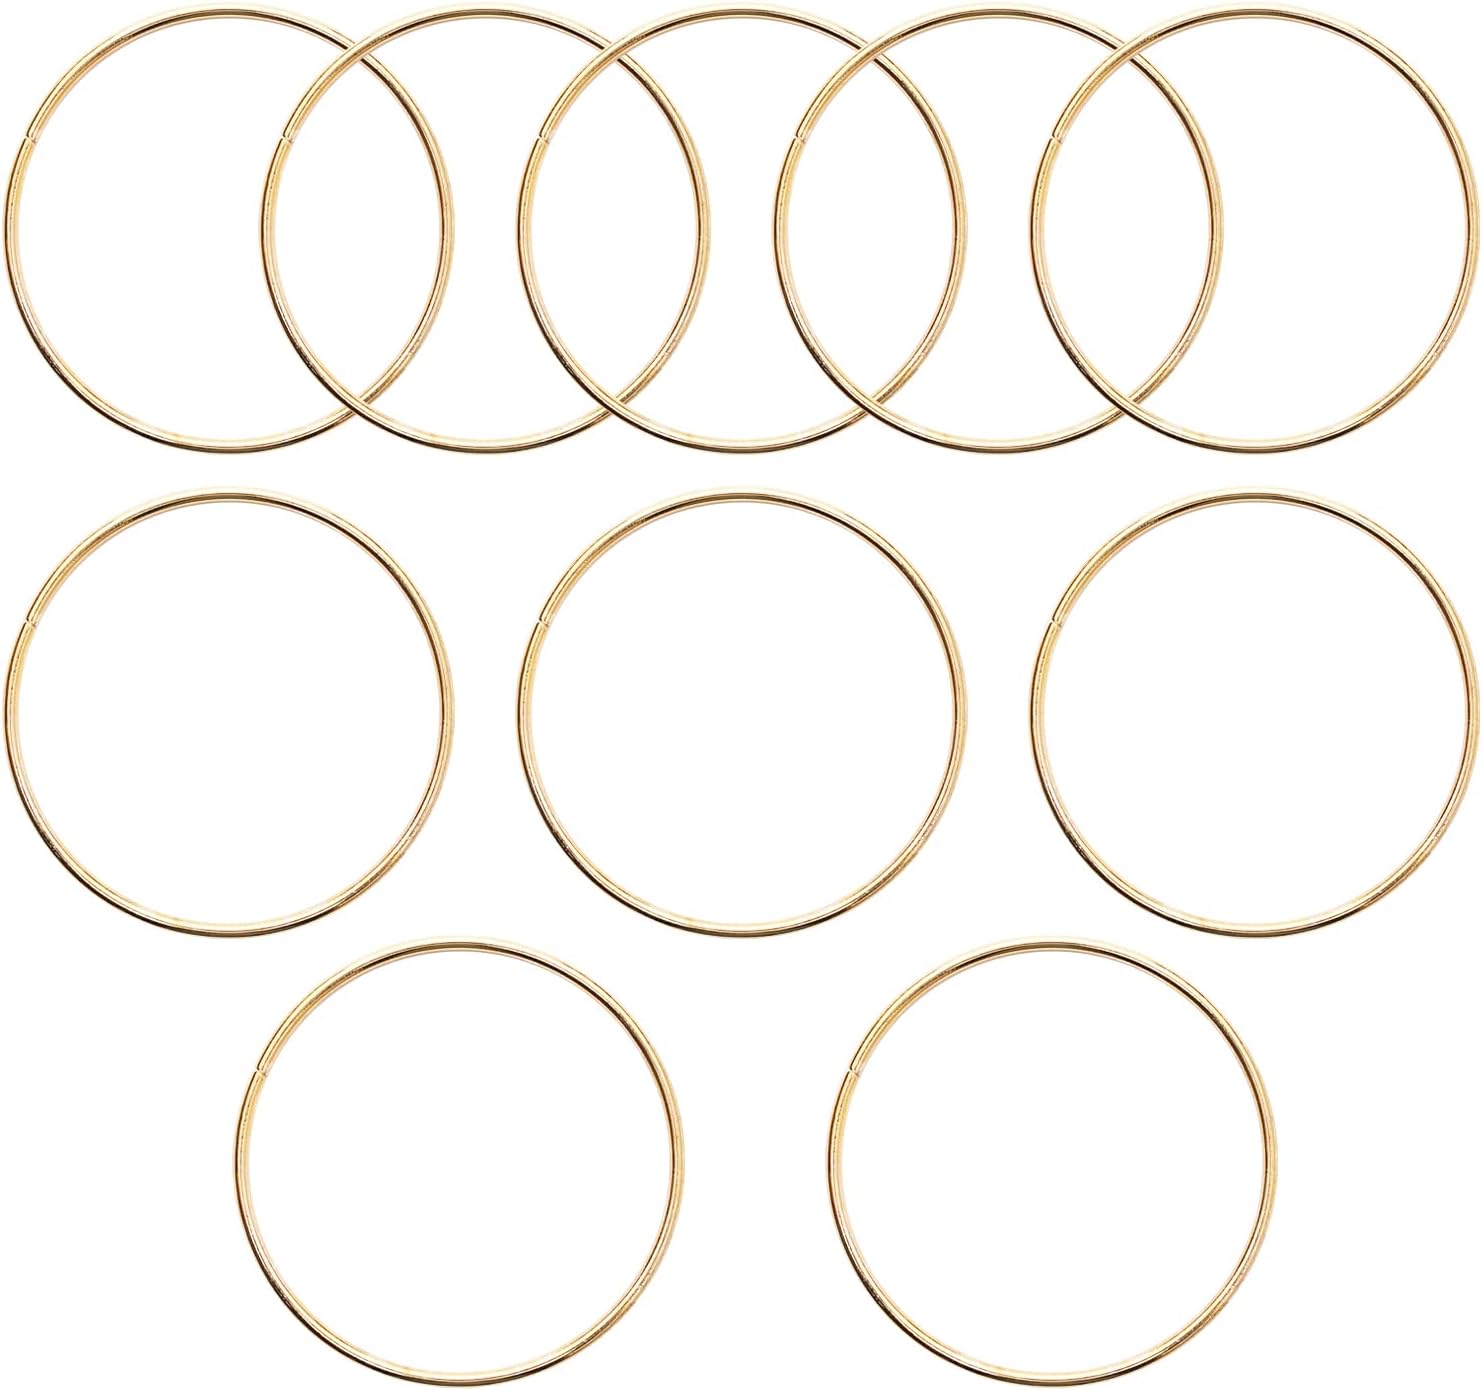 10 Pcs 3 Inch Metal Craft Rings Hoops Gold Macrame Hoops Rings Dream Catcher Rings for DIY Crafts, Macrame and Dream Catcher Supplies